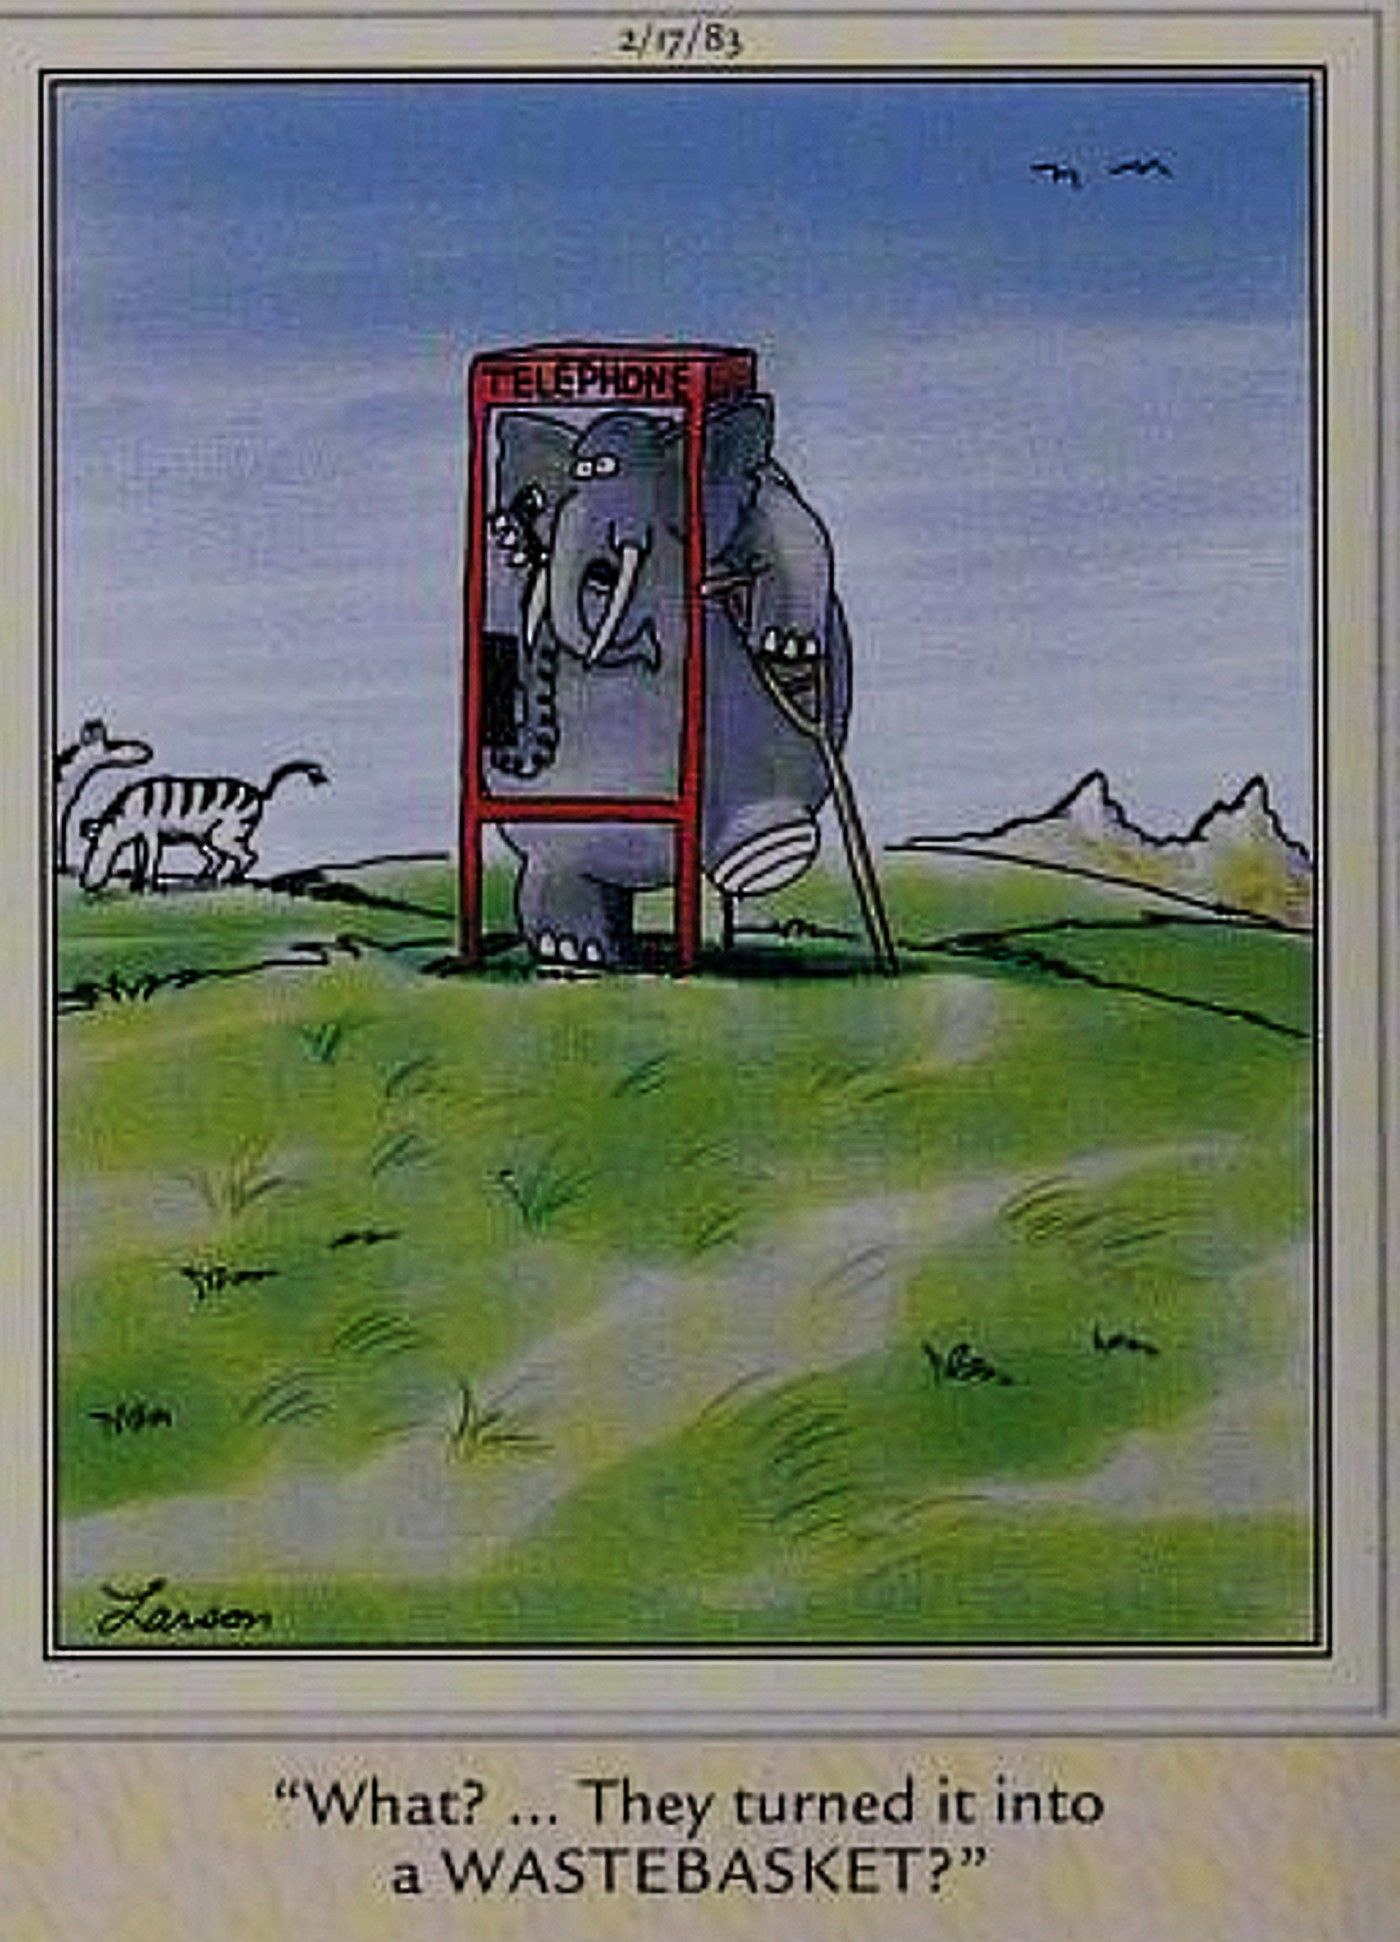 Far Side, elephant squeezed into a phone booth calling to find out what happened to the leg hunters took from him